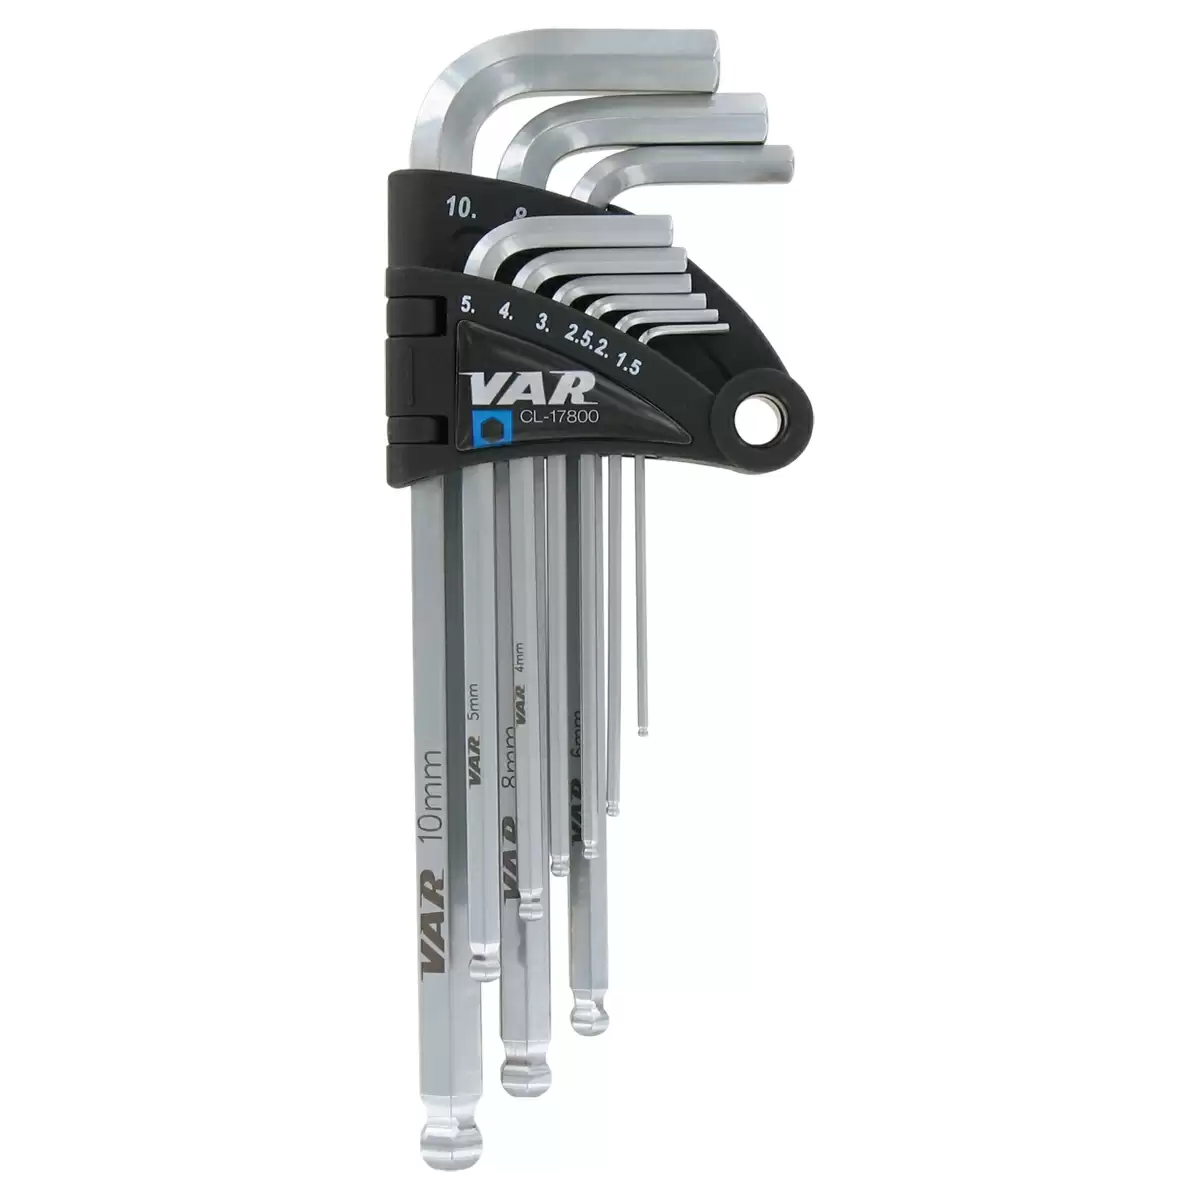 Professional Hex Wrench Set 1.5/2/2.5/3/4/5/6/8/10 - image